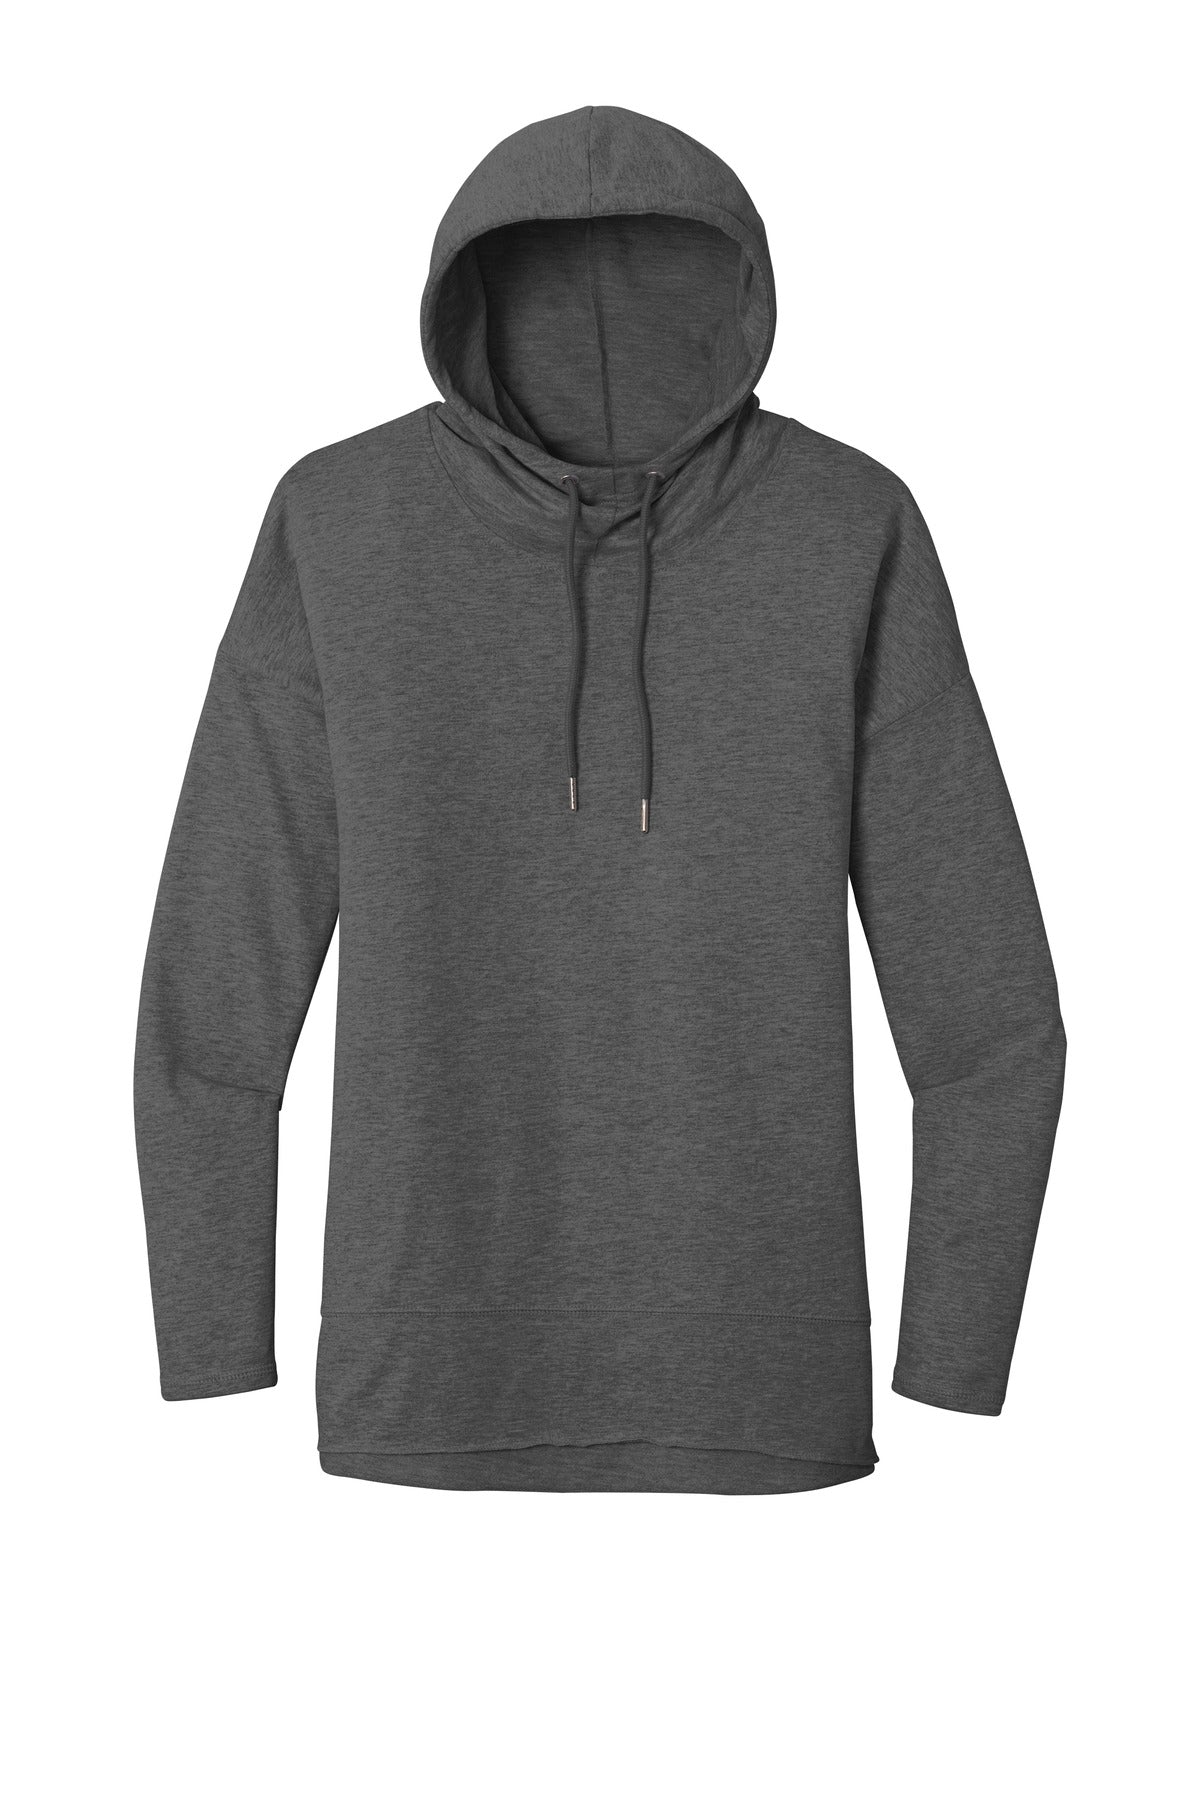 Ladies Featherweight French Terry Hoodie